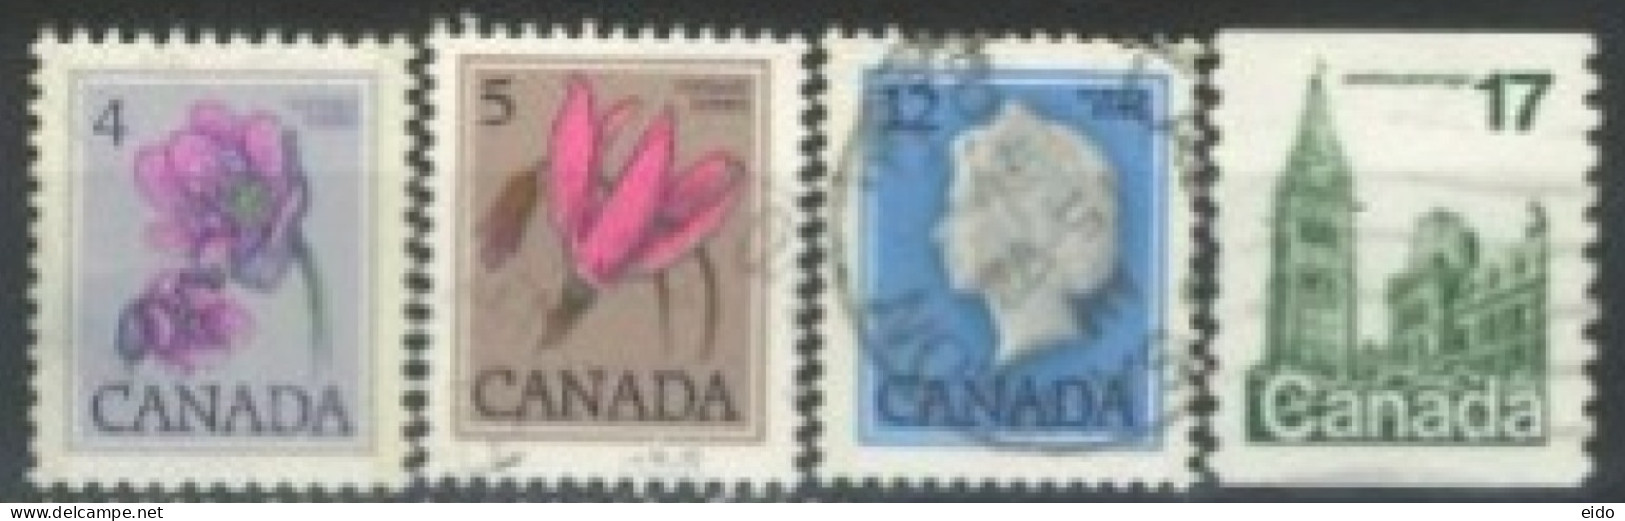 CANADA - 1977, QUEEN ELIZABETH II, FLOWERS & HOUSE OF PARLIAMENTSTAMPS SET OF 4, USED. - Used Stamps